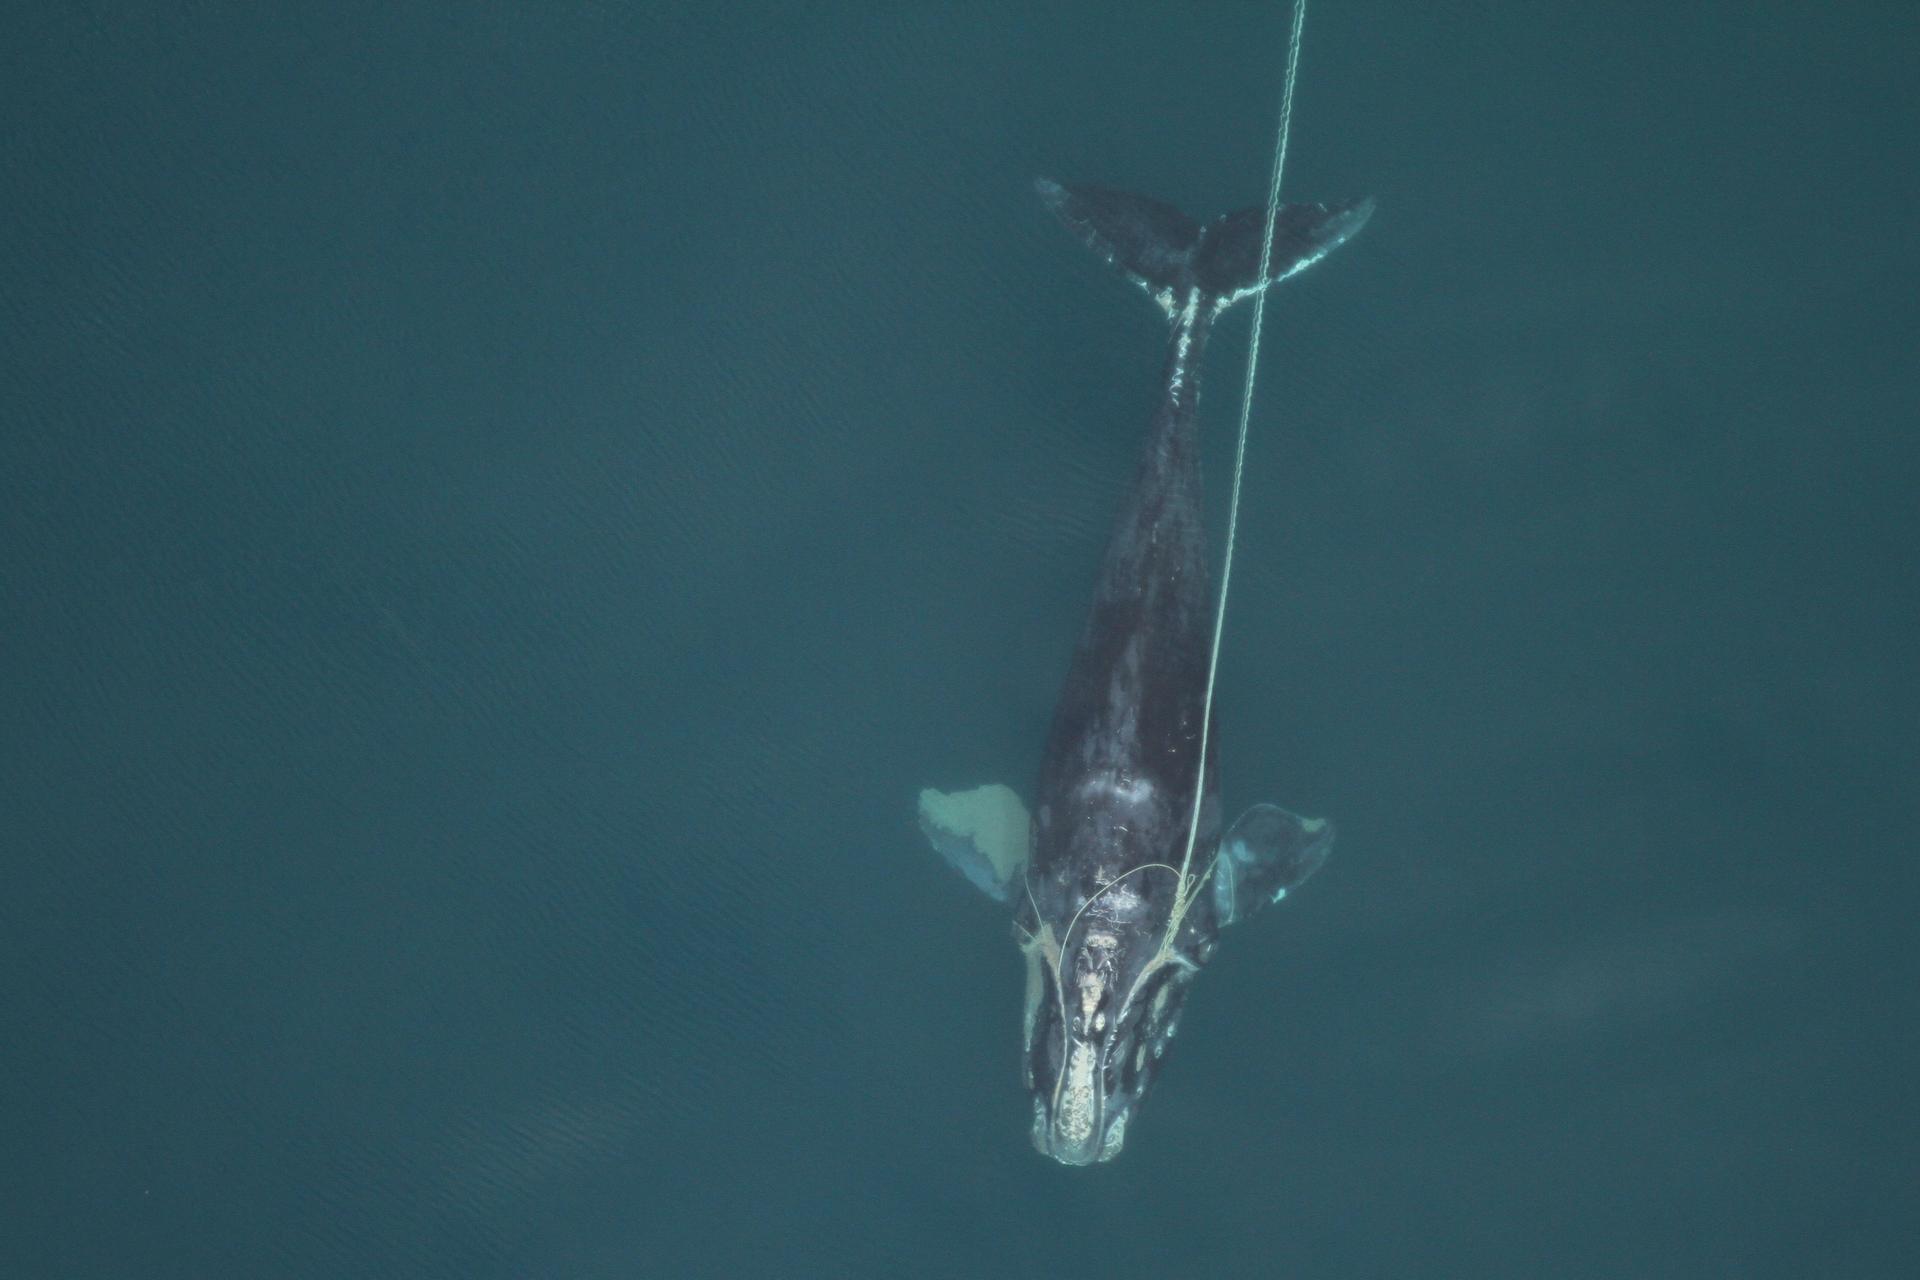 A female North Atlantic Right whale entangled in fishing gear